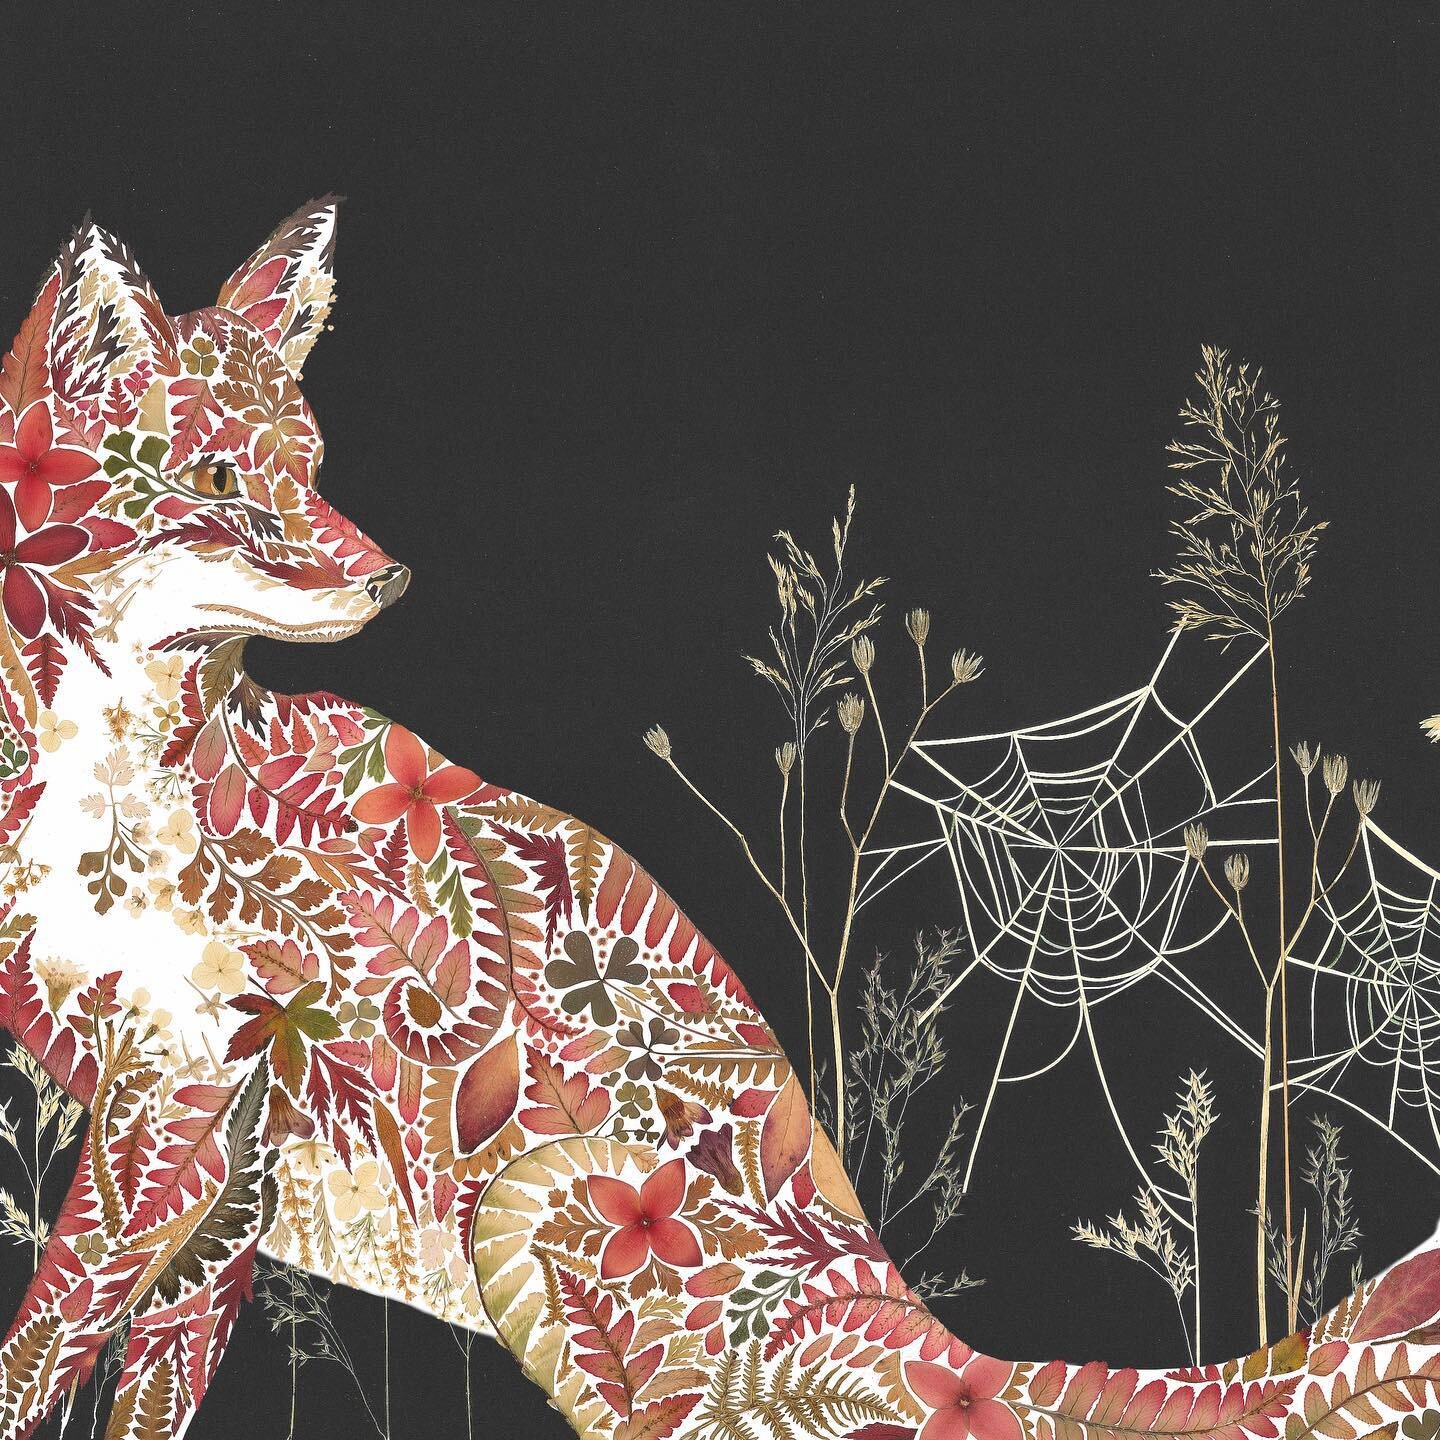 A fox in the nighttime, including pressed flowers from my Grandmothers garden, and cobwebs made out of grass blades 🍁🍂🥀 (from A Year in the Wild / Drawn from Nature) #pressedflowers #pressedflowerart #foxillustration